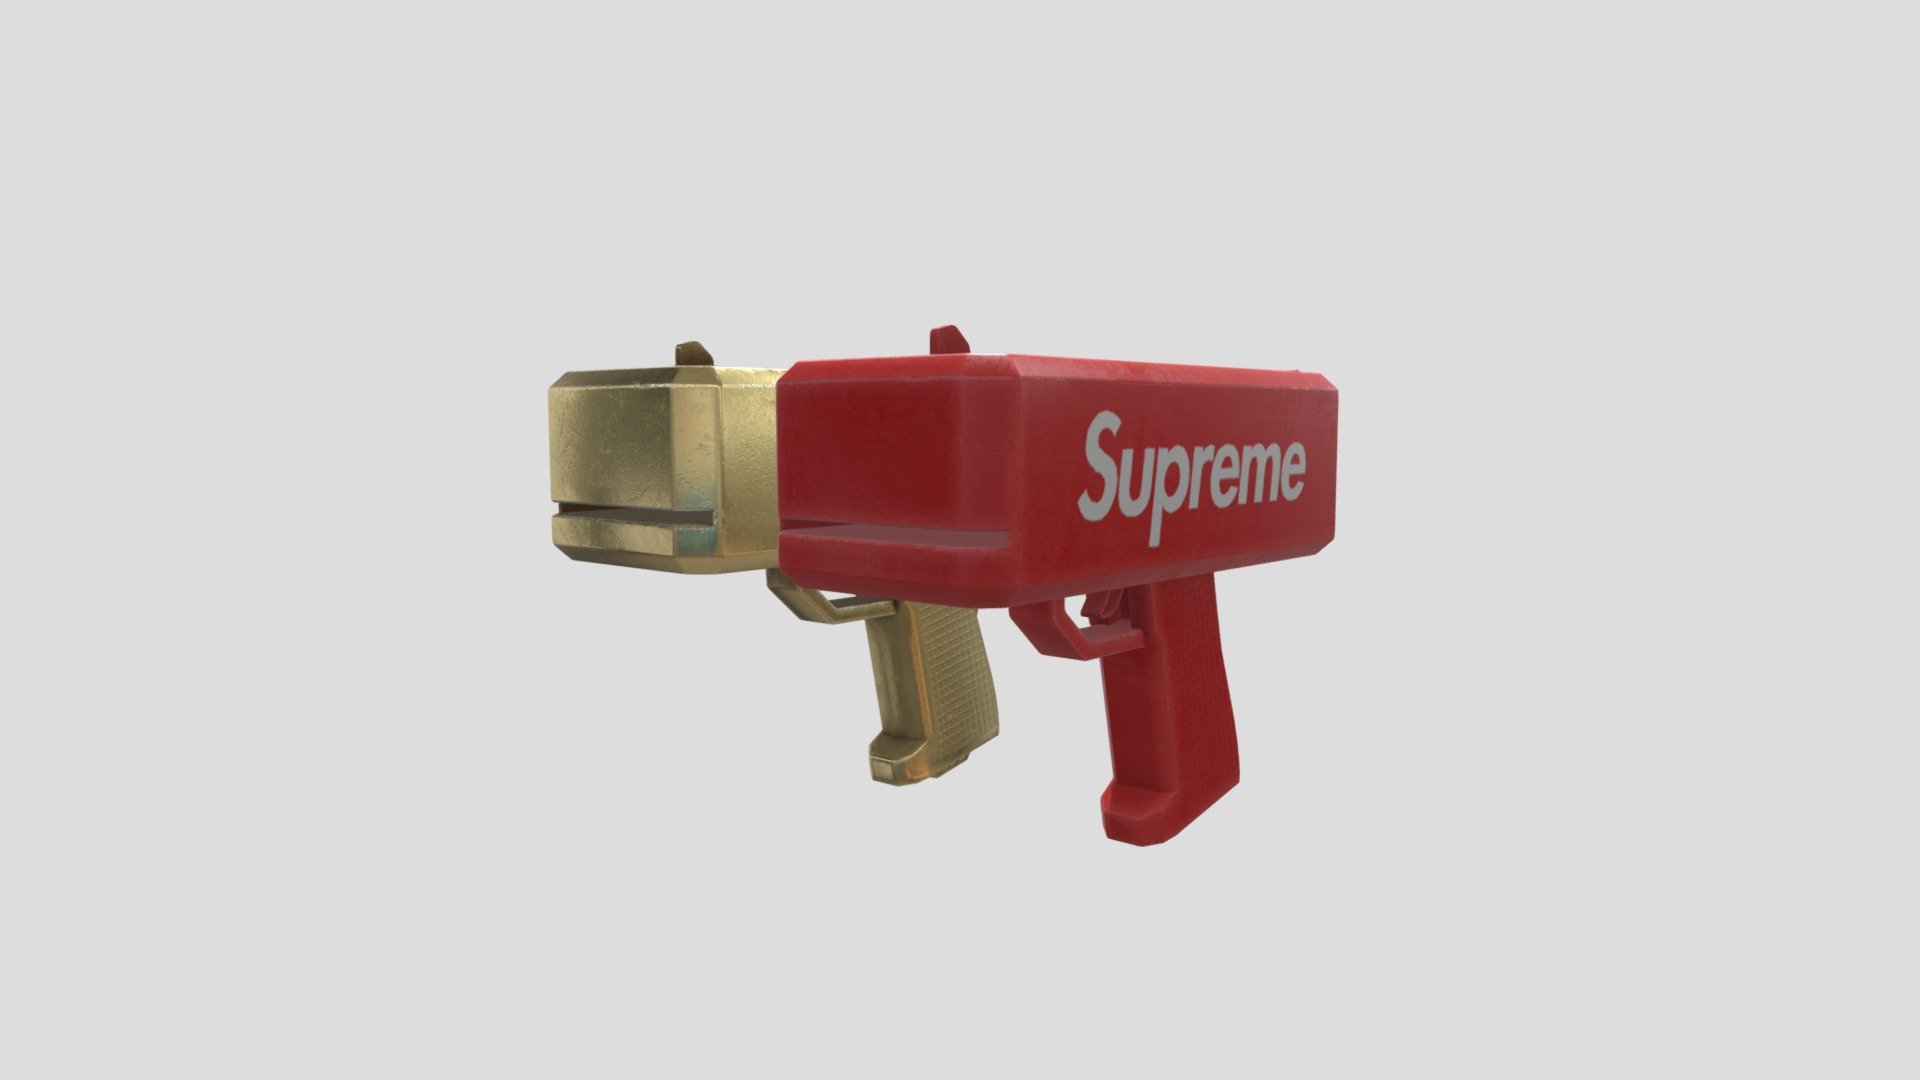 This money Gun comes in two different varients, a Traditional Supreme Version and a gold version. The model is also modeled prmitively on the interior so the lid can open up. The mesh is Viewable from all angles and distances.

This Includes:

The mesh (Red, Gold)
2K and 1K Texture Sets (Albedo, Metallic, Roughness, Normal, Height)
2 Variants (Red, Gold)
The mesh is UV Unwrapped with vertex colors for easy retexturing 3d model